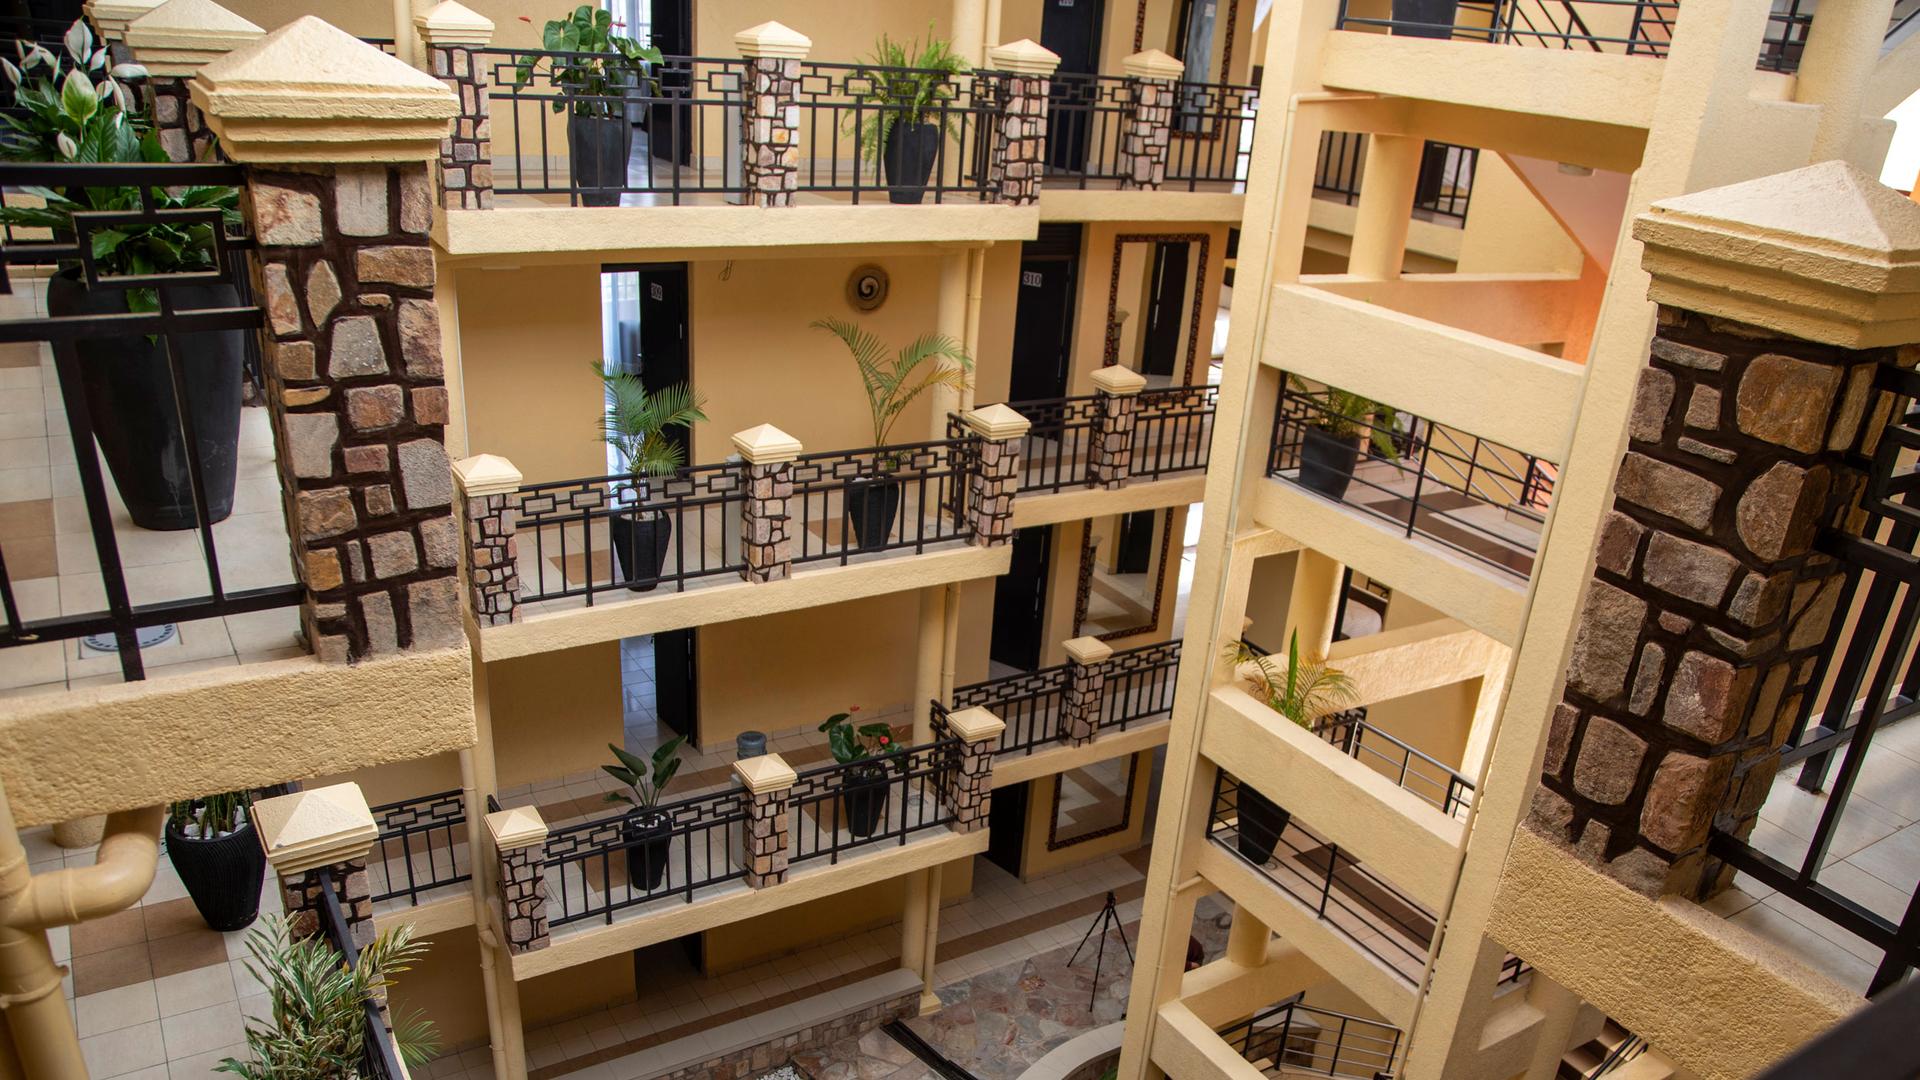 The interior of the Hope Hostel, which is one of the locations expected to house some of the asylum-seekers due to be sent from Britain to Rwanda, is seen in the capital Kigali, Rwanda Friday, June 10, 2022. 